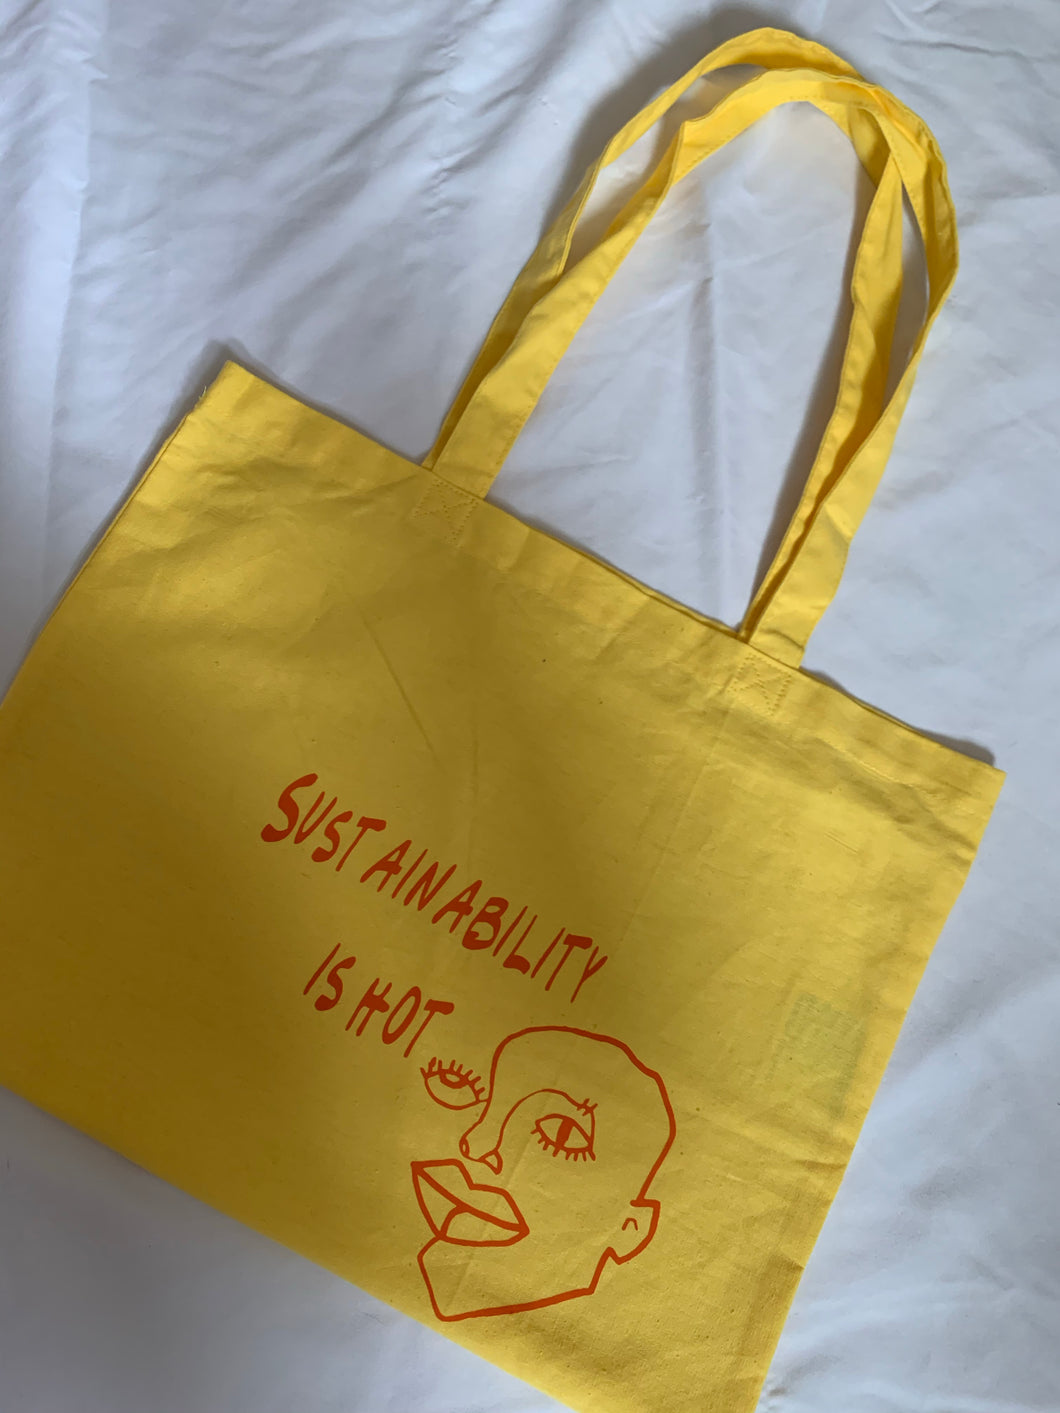 Sustainability is Hot Tote bag